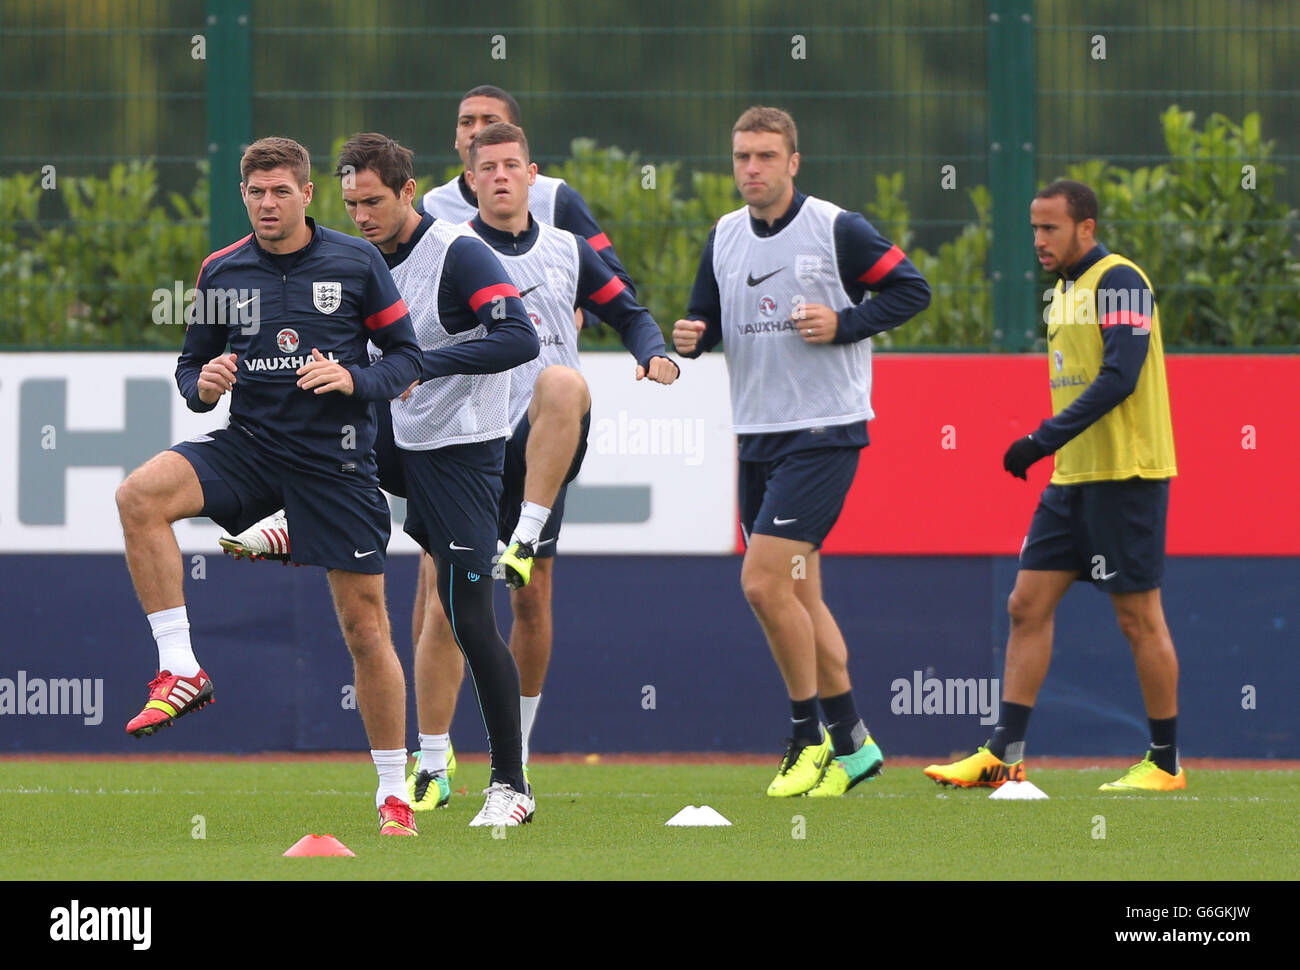 Soccer - FIFA World Cup Qualifying - Group H - England v Poland - England Training Session - London Colney Stock Photo